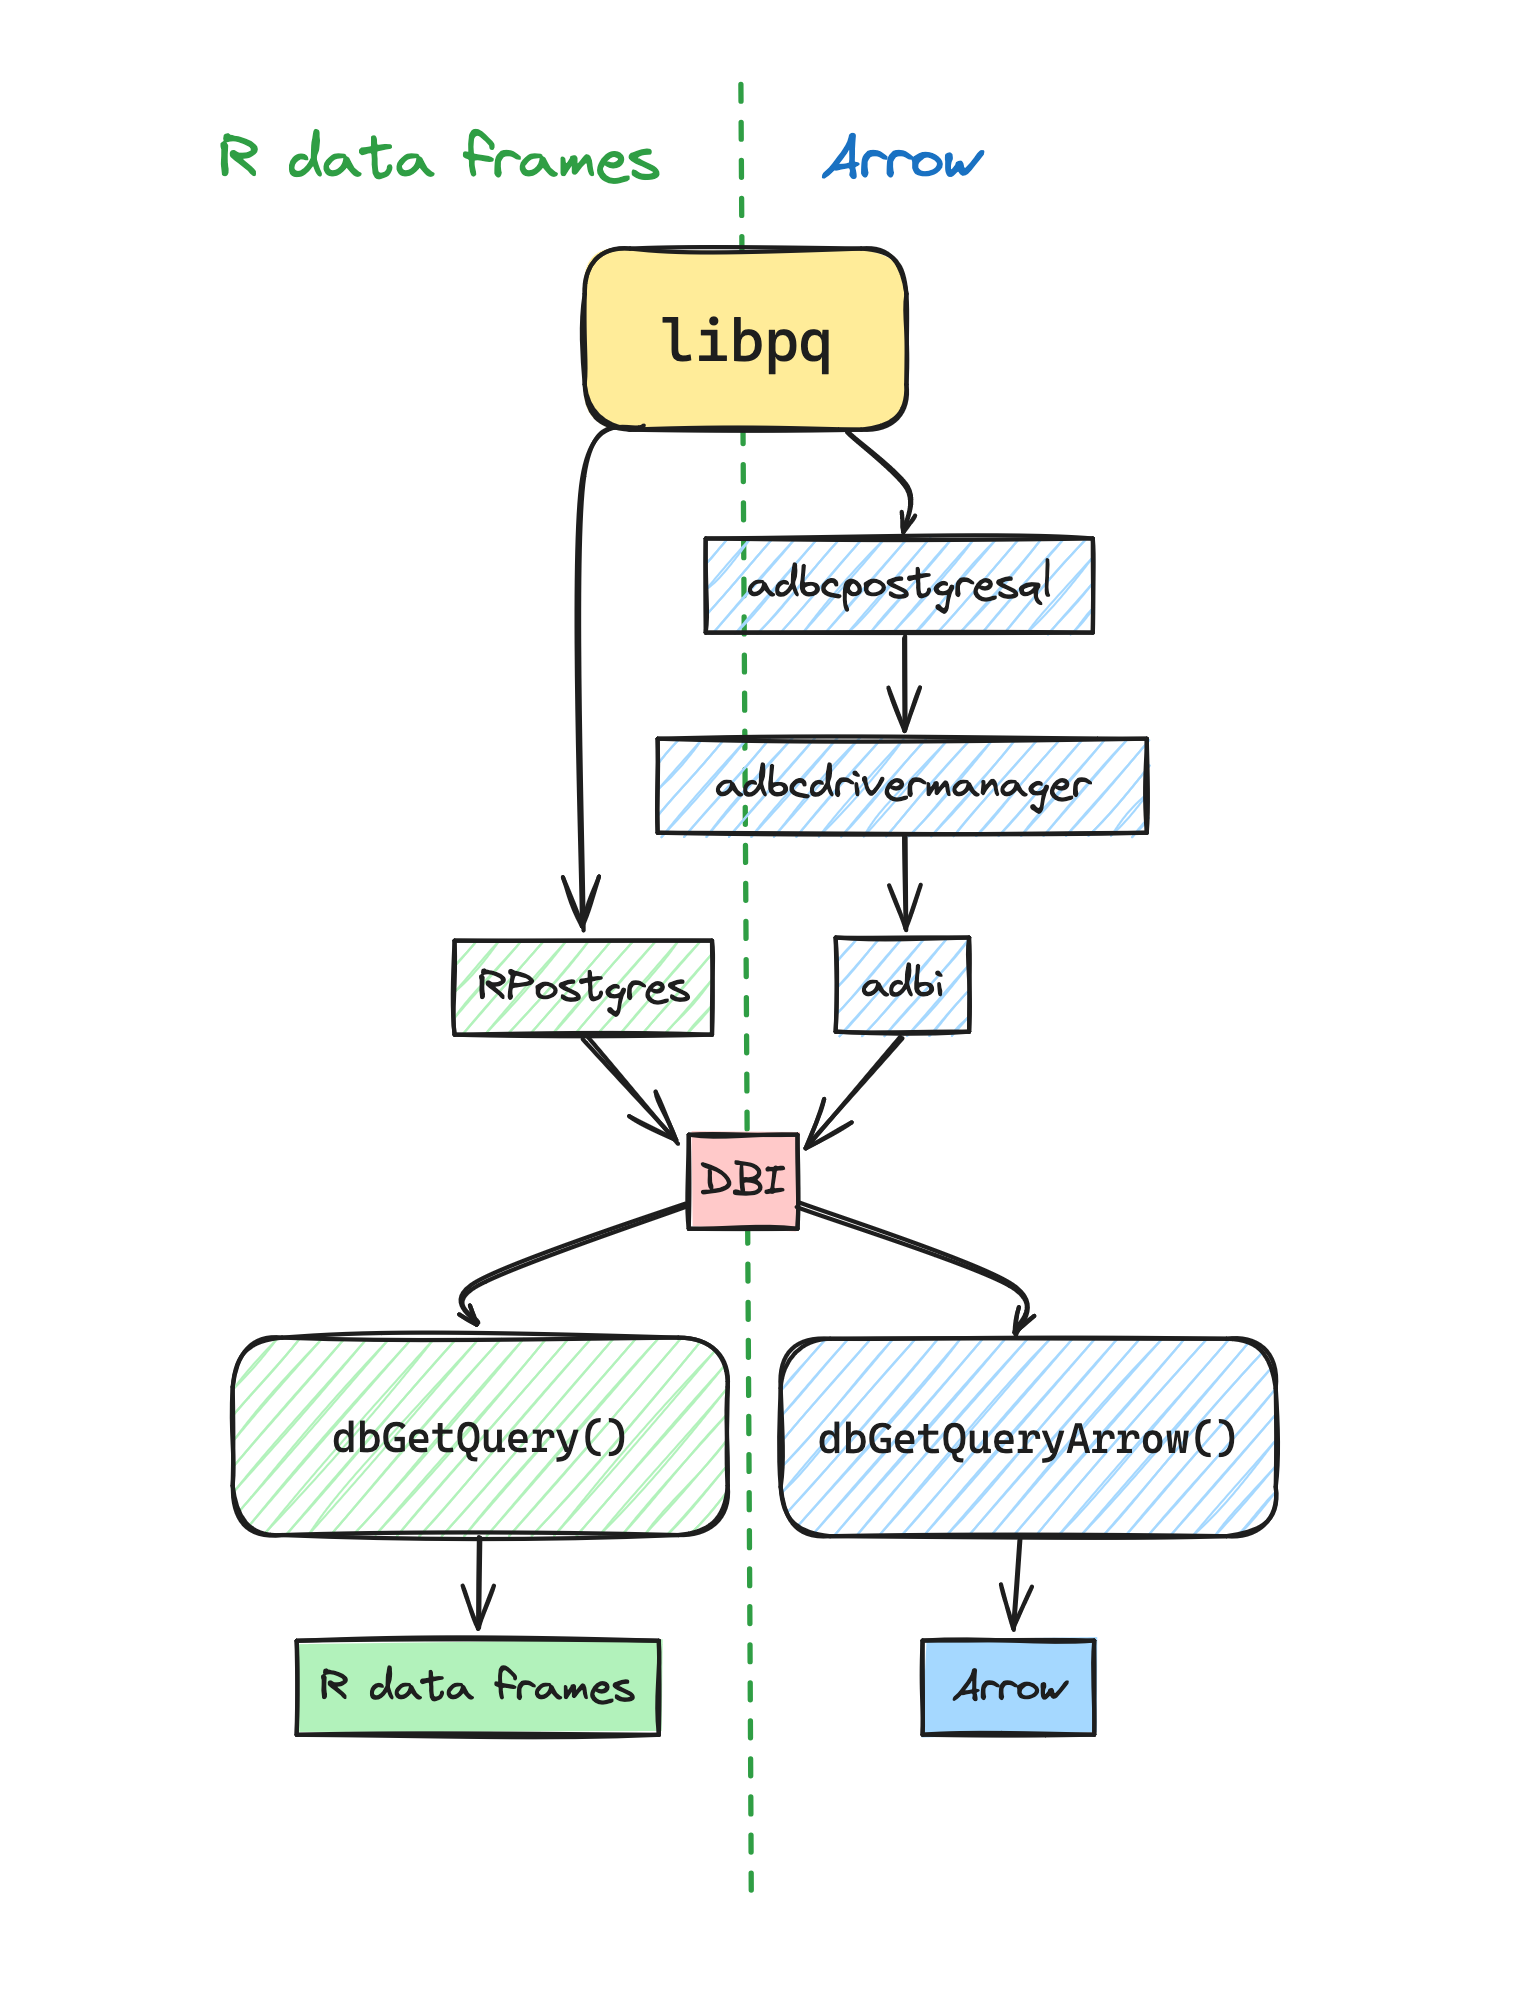 Space divided into two areas, R data frames at the left, Arrow at the right. Two concurrent data flows from libpq to DBI are shown: one via RPostgres through R data frames, one via adbcpostgresql and adbi through Arrow. The two flows merge at the DBI layer. From DBI, consumers can use dbGetQuery() to get data frames, or dbGetQueryArrow() to get Arrow streams.